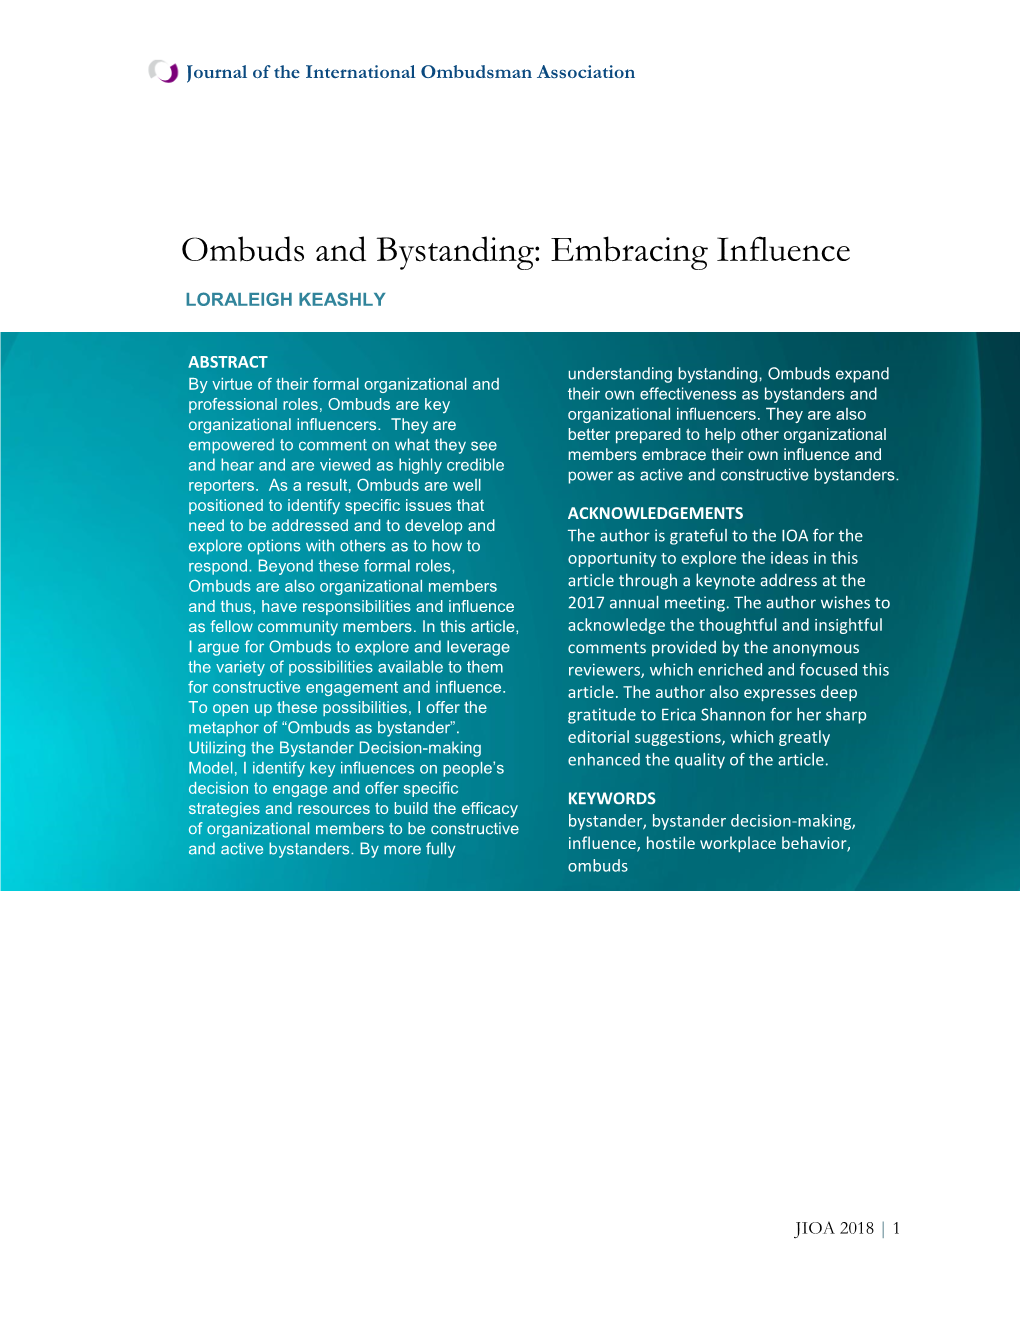 Ombuds and Bystanding: Embracing Influence